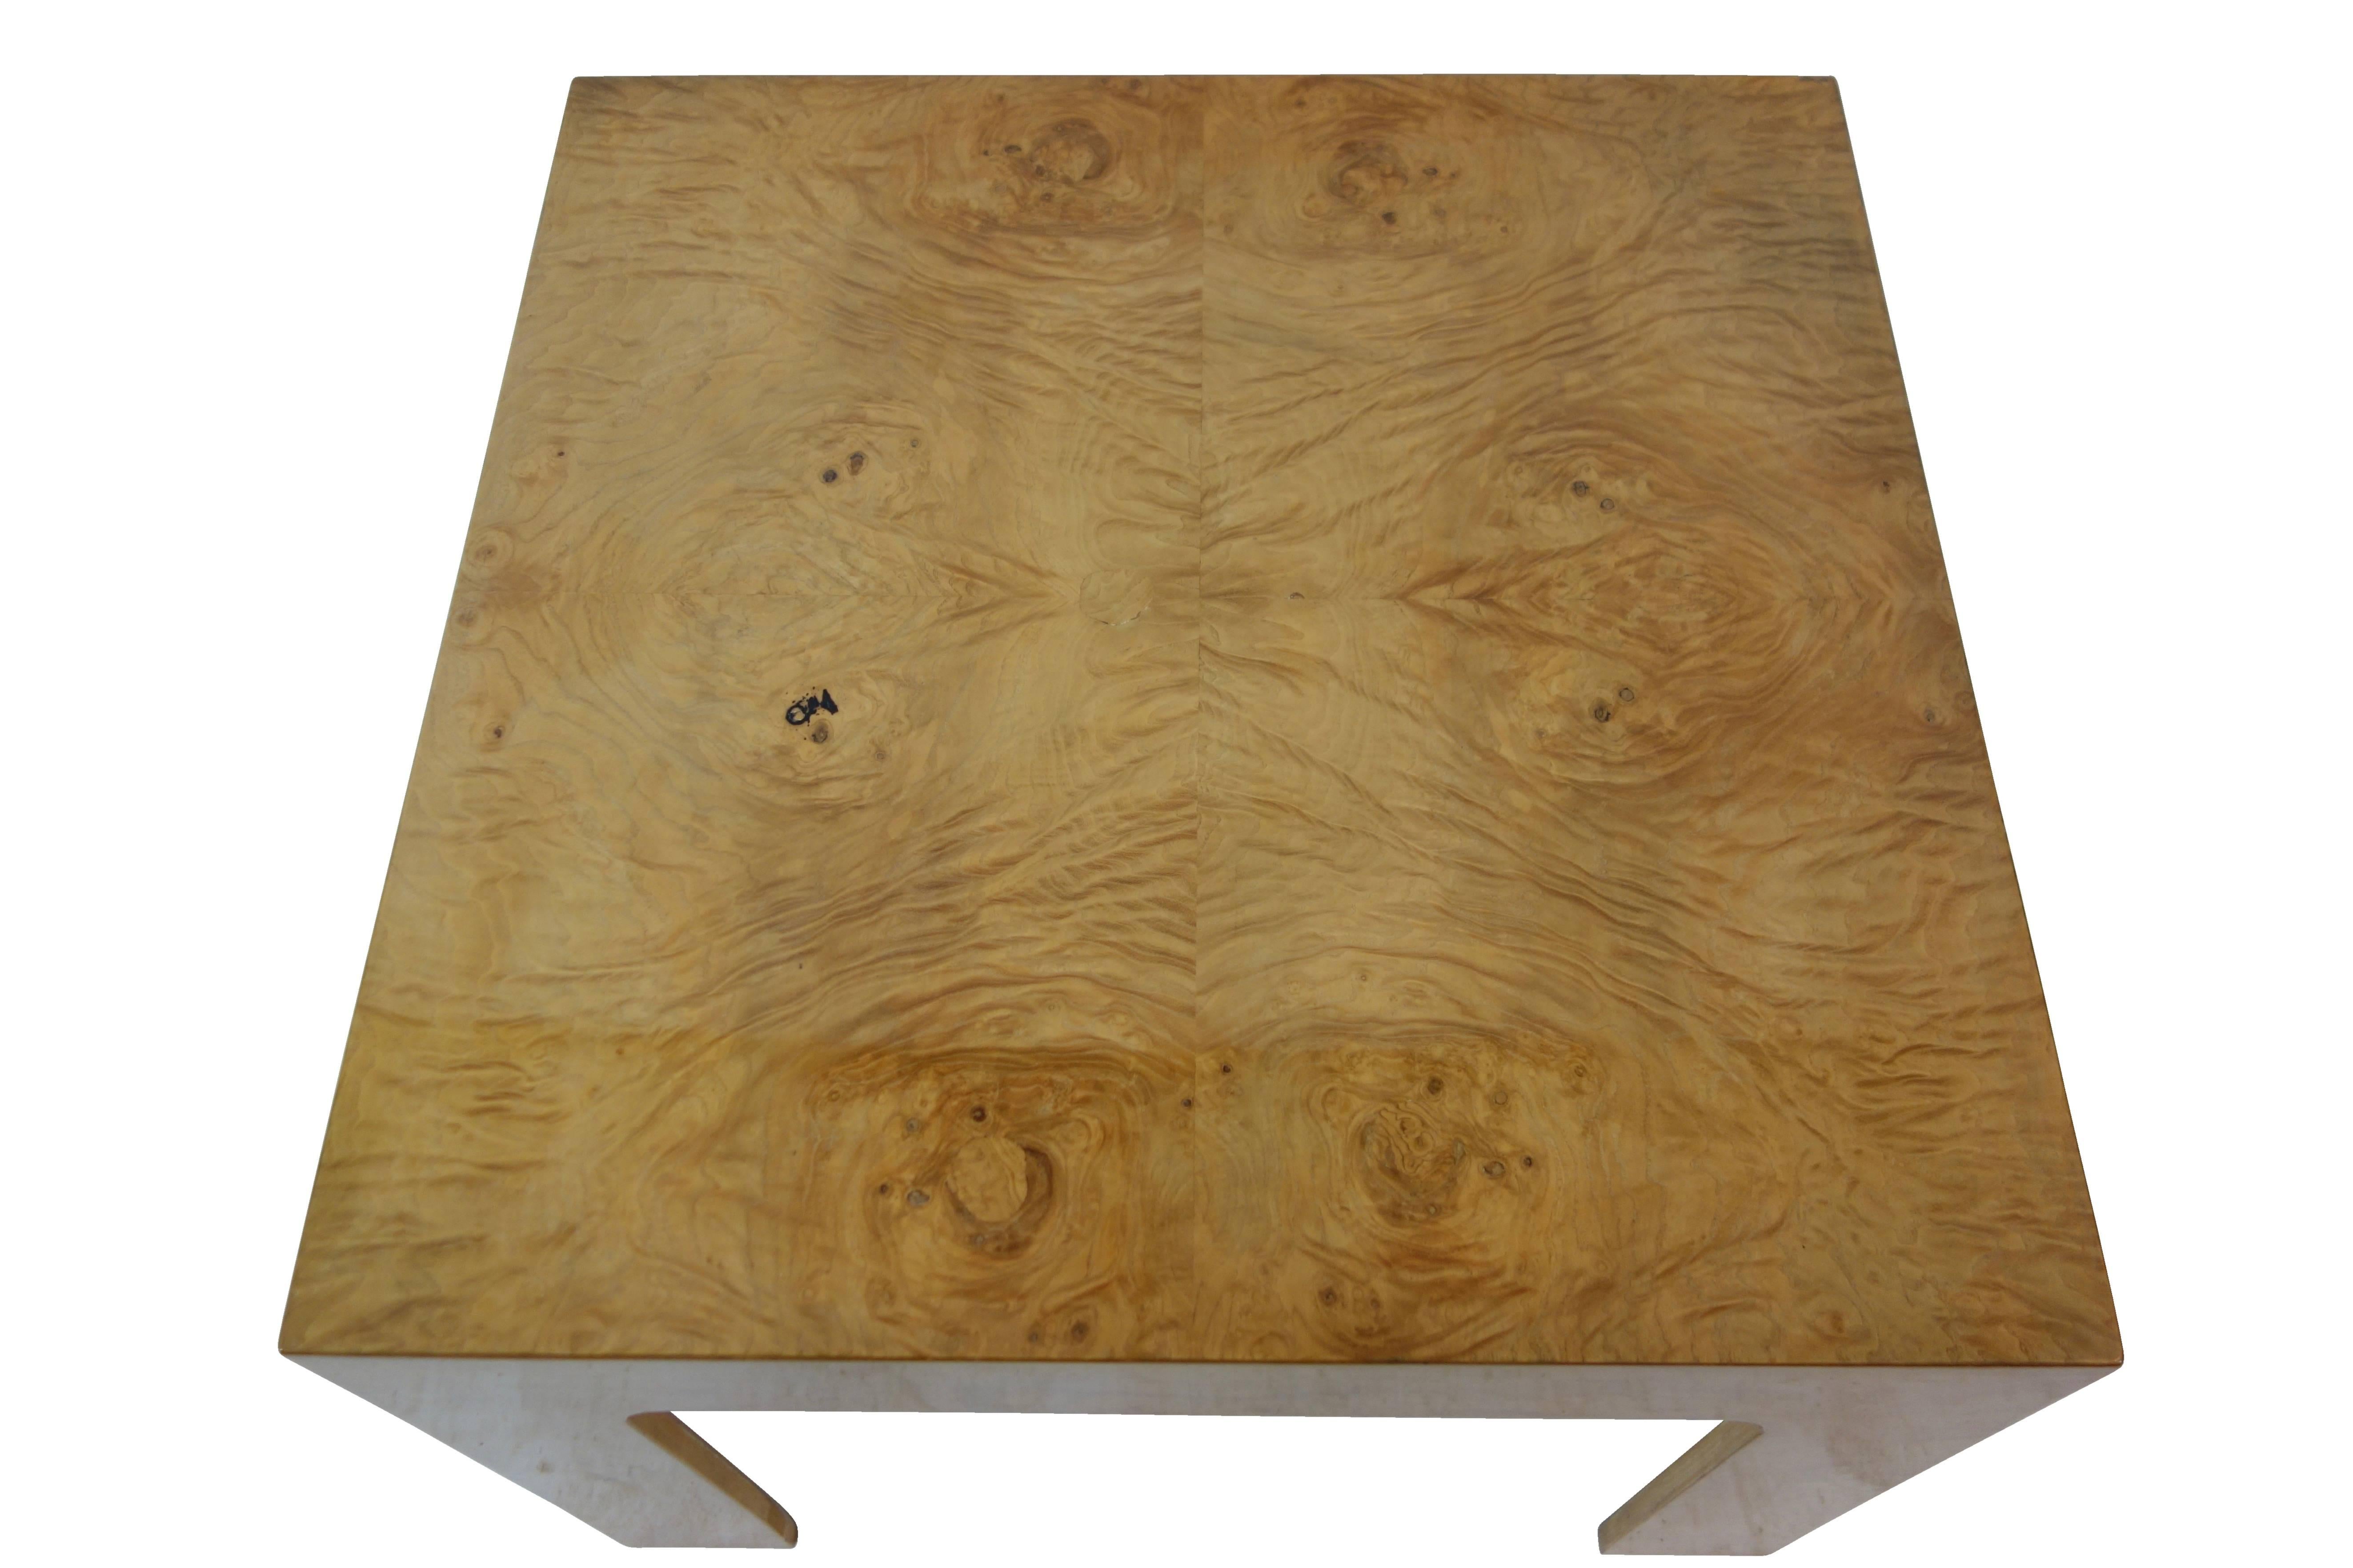 This is a square bookmatched burled Anigre wood side table by Ron Seff, circa 1970.